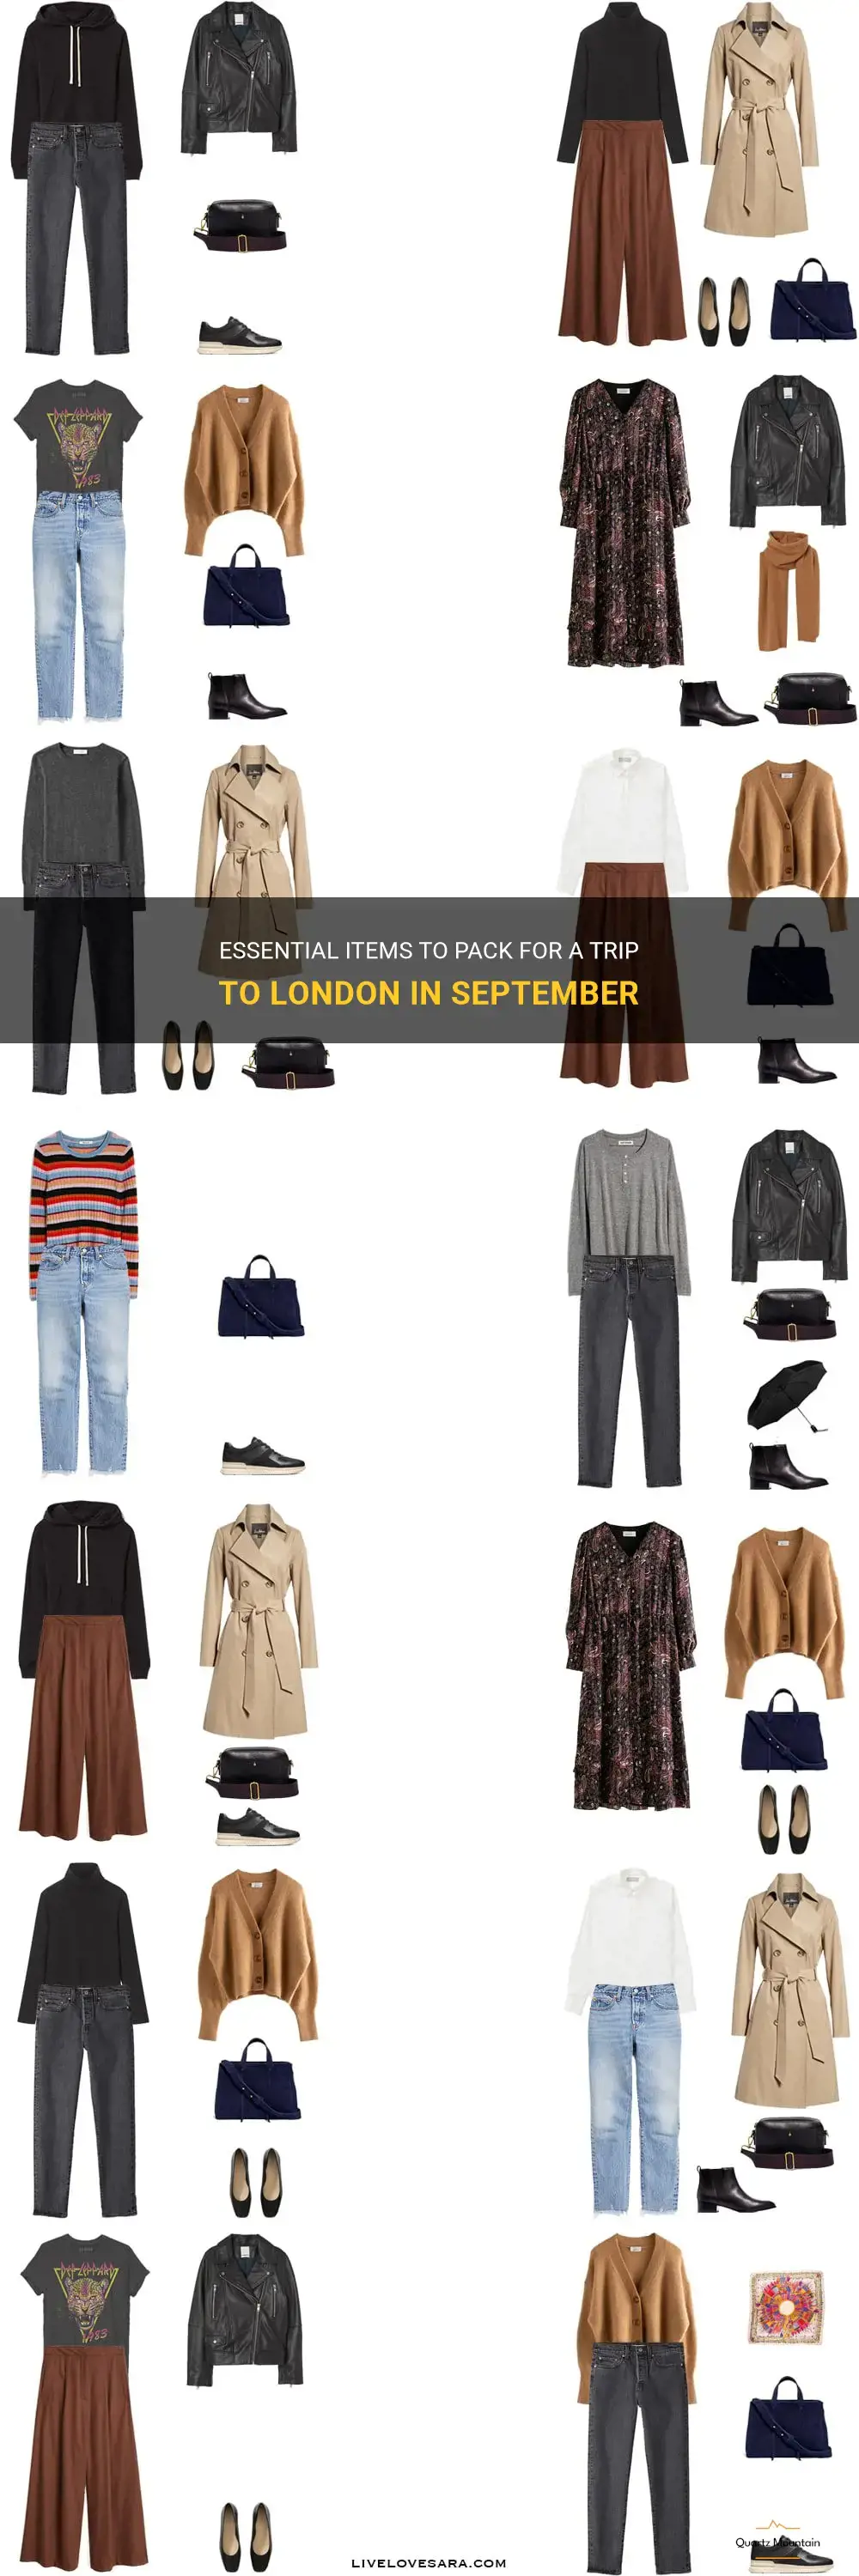 what to pack for london trip in September